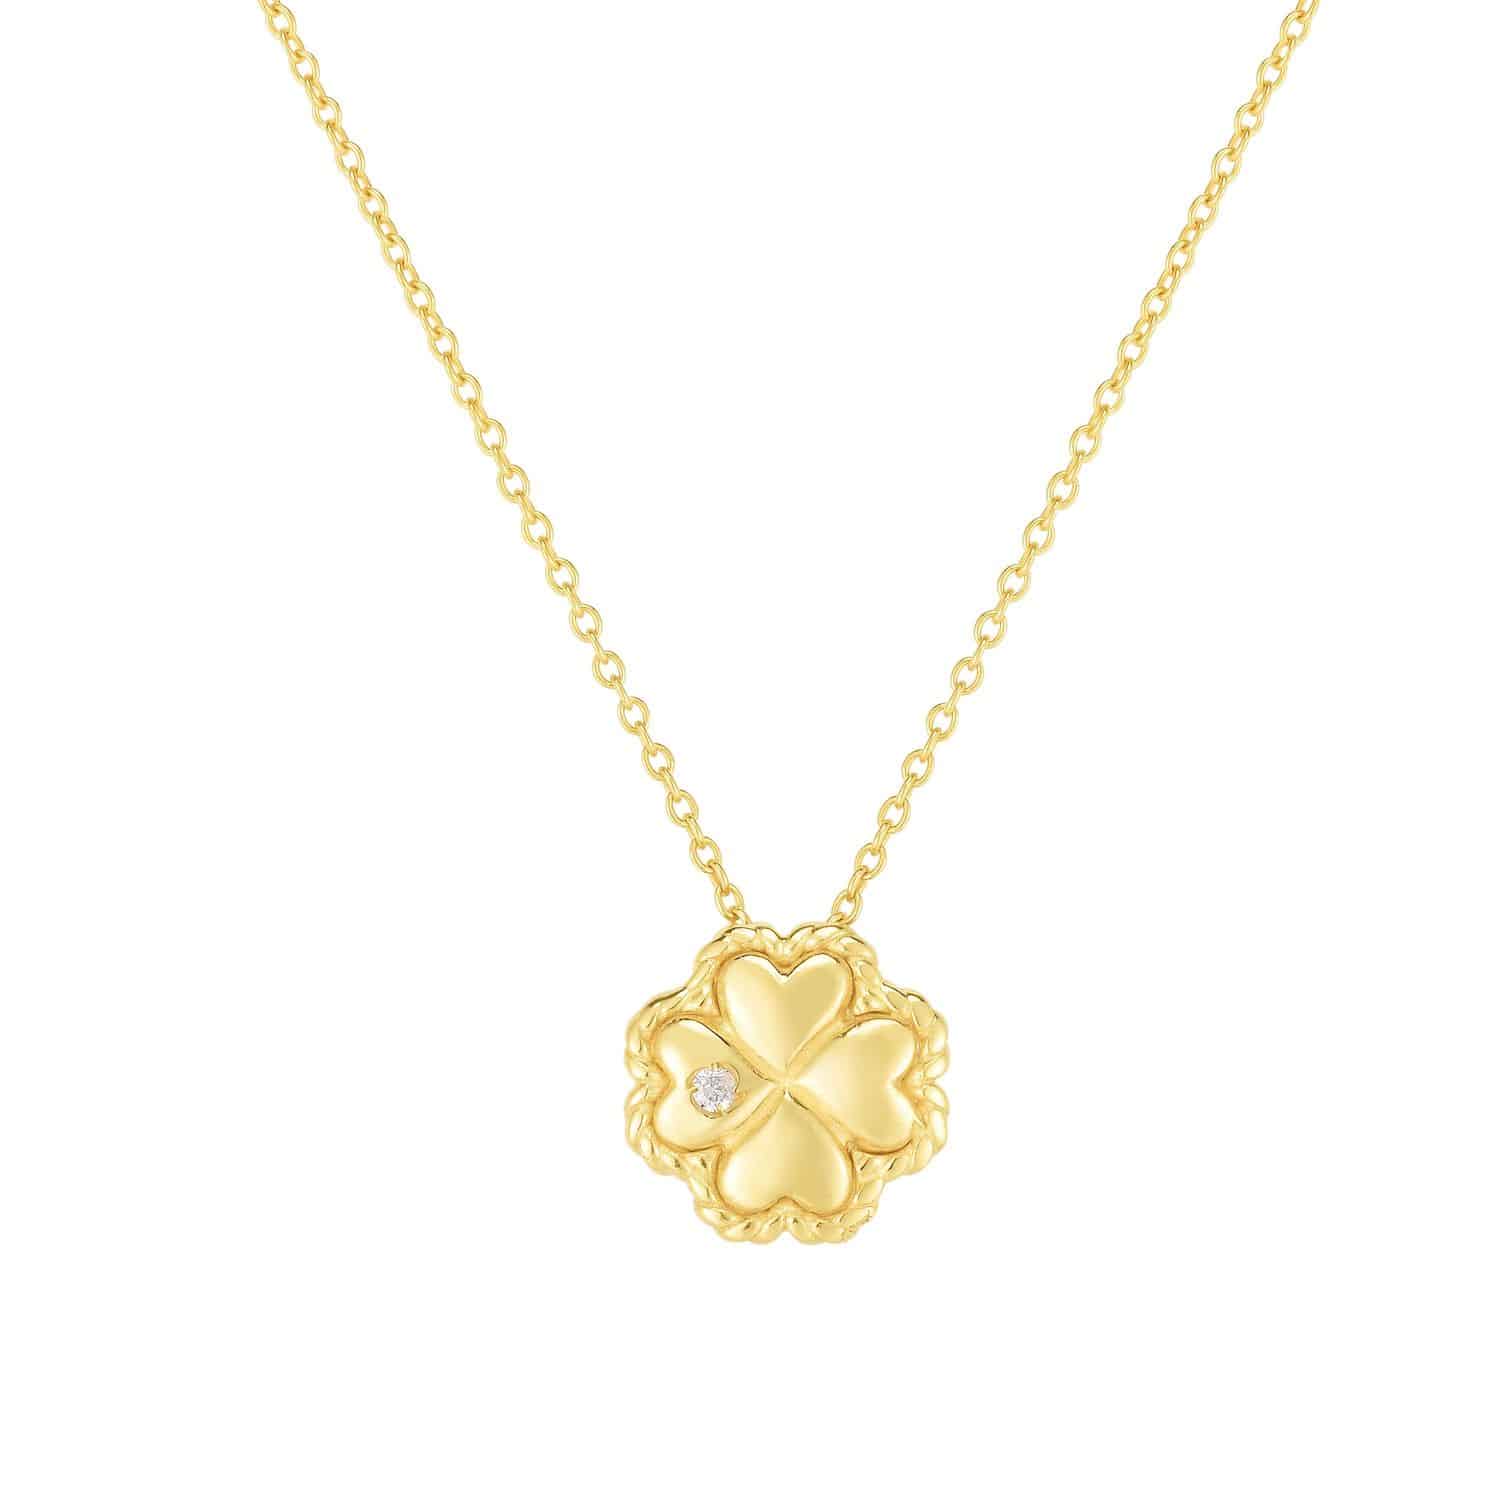 Natural Diamond 14K Yellow Gold Twisted Rope Clover Pendant Necklace 16"-18" Adj